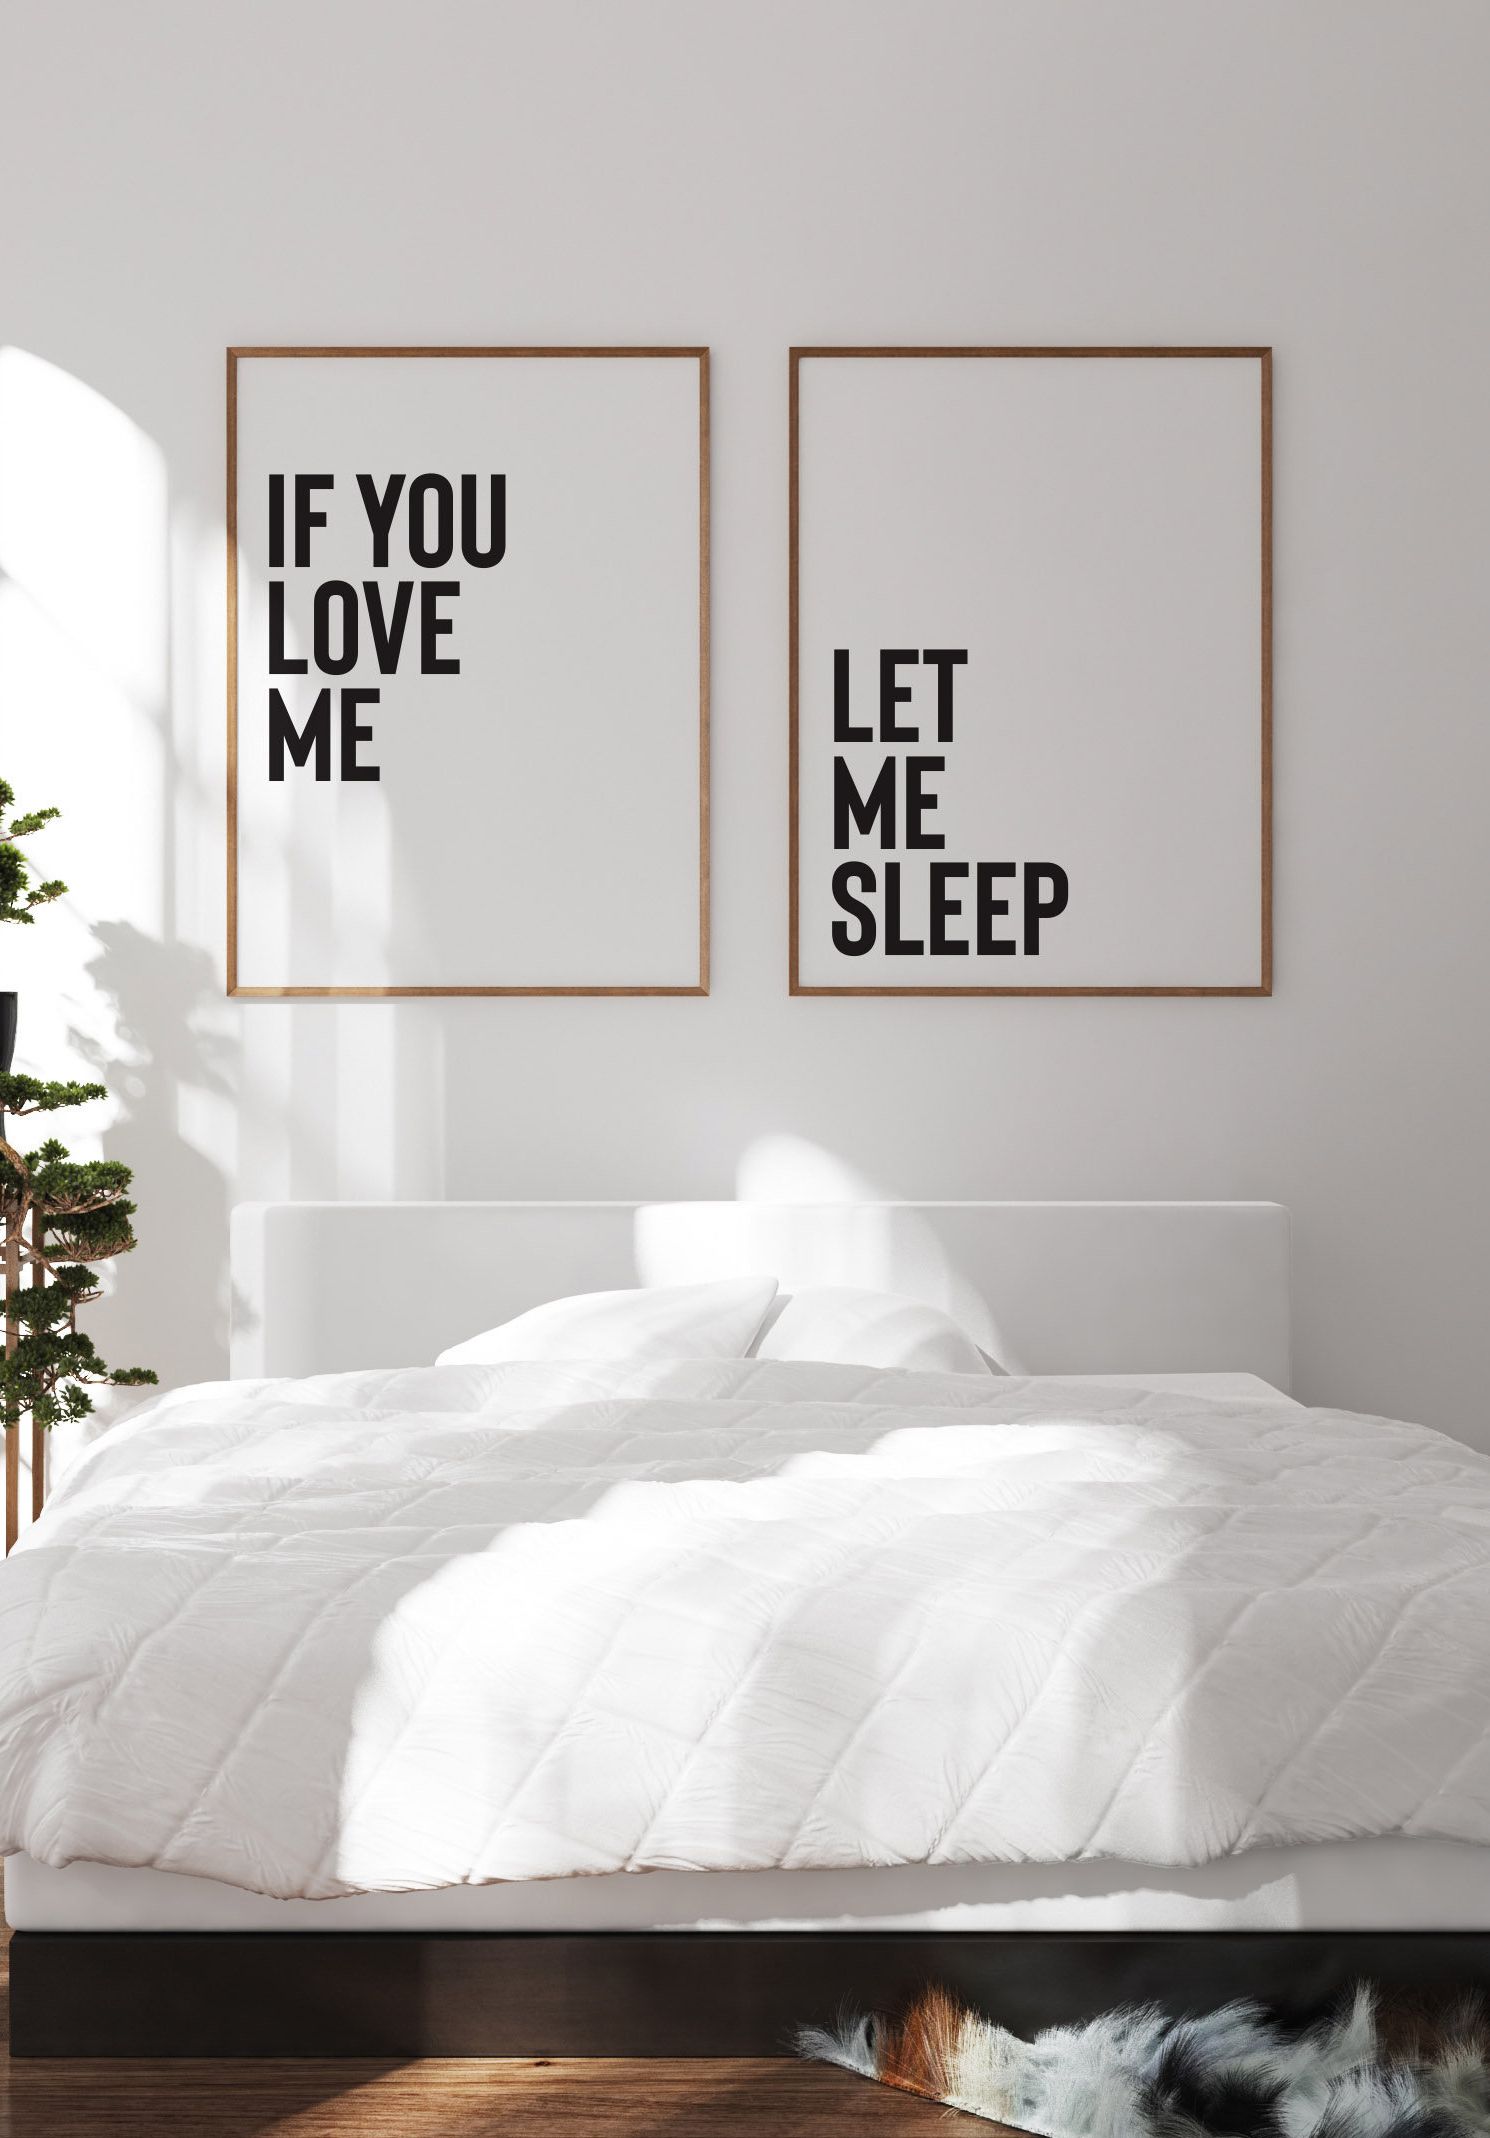 Modern Bedroom Set Selection for a  Happier Life